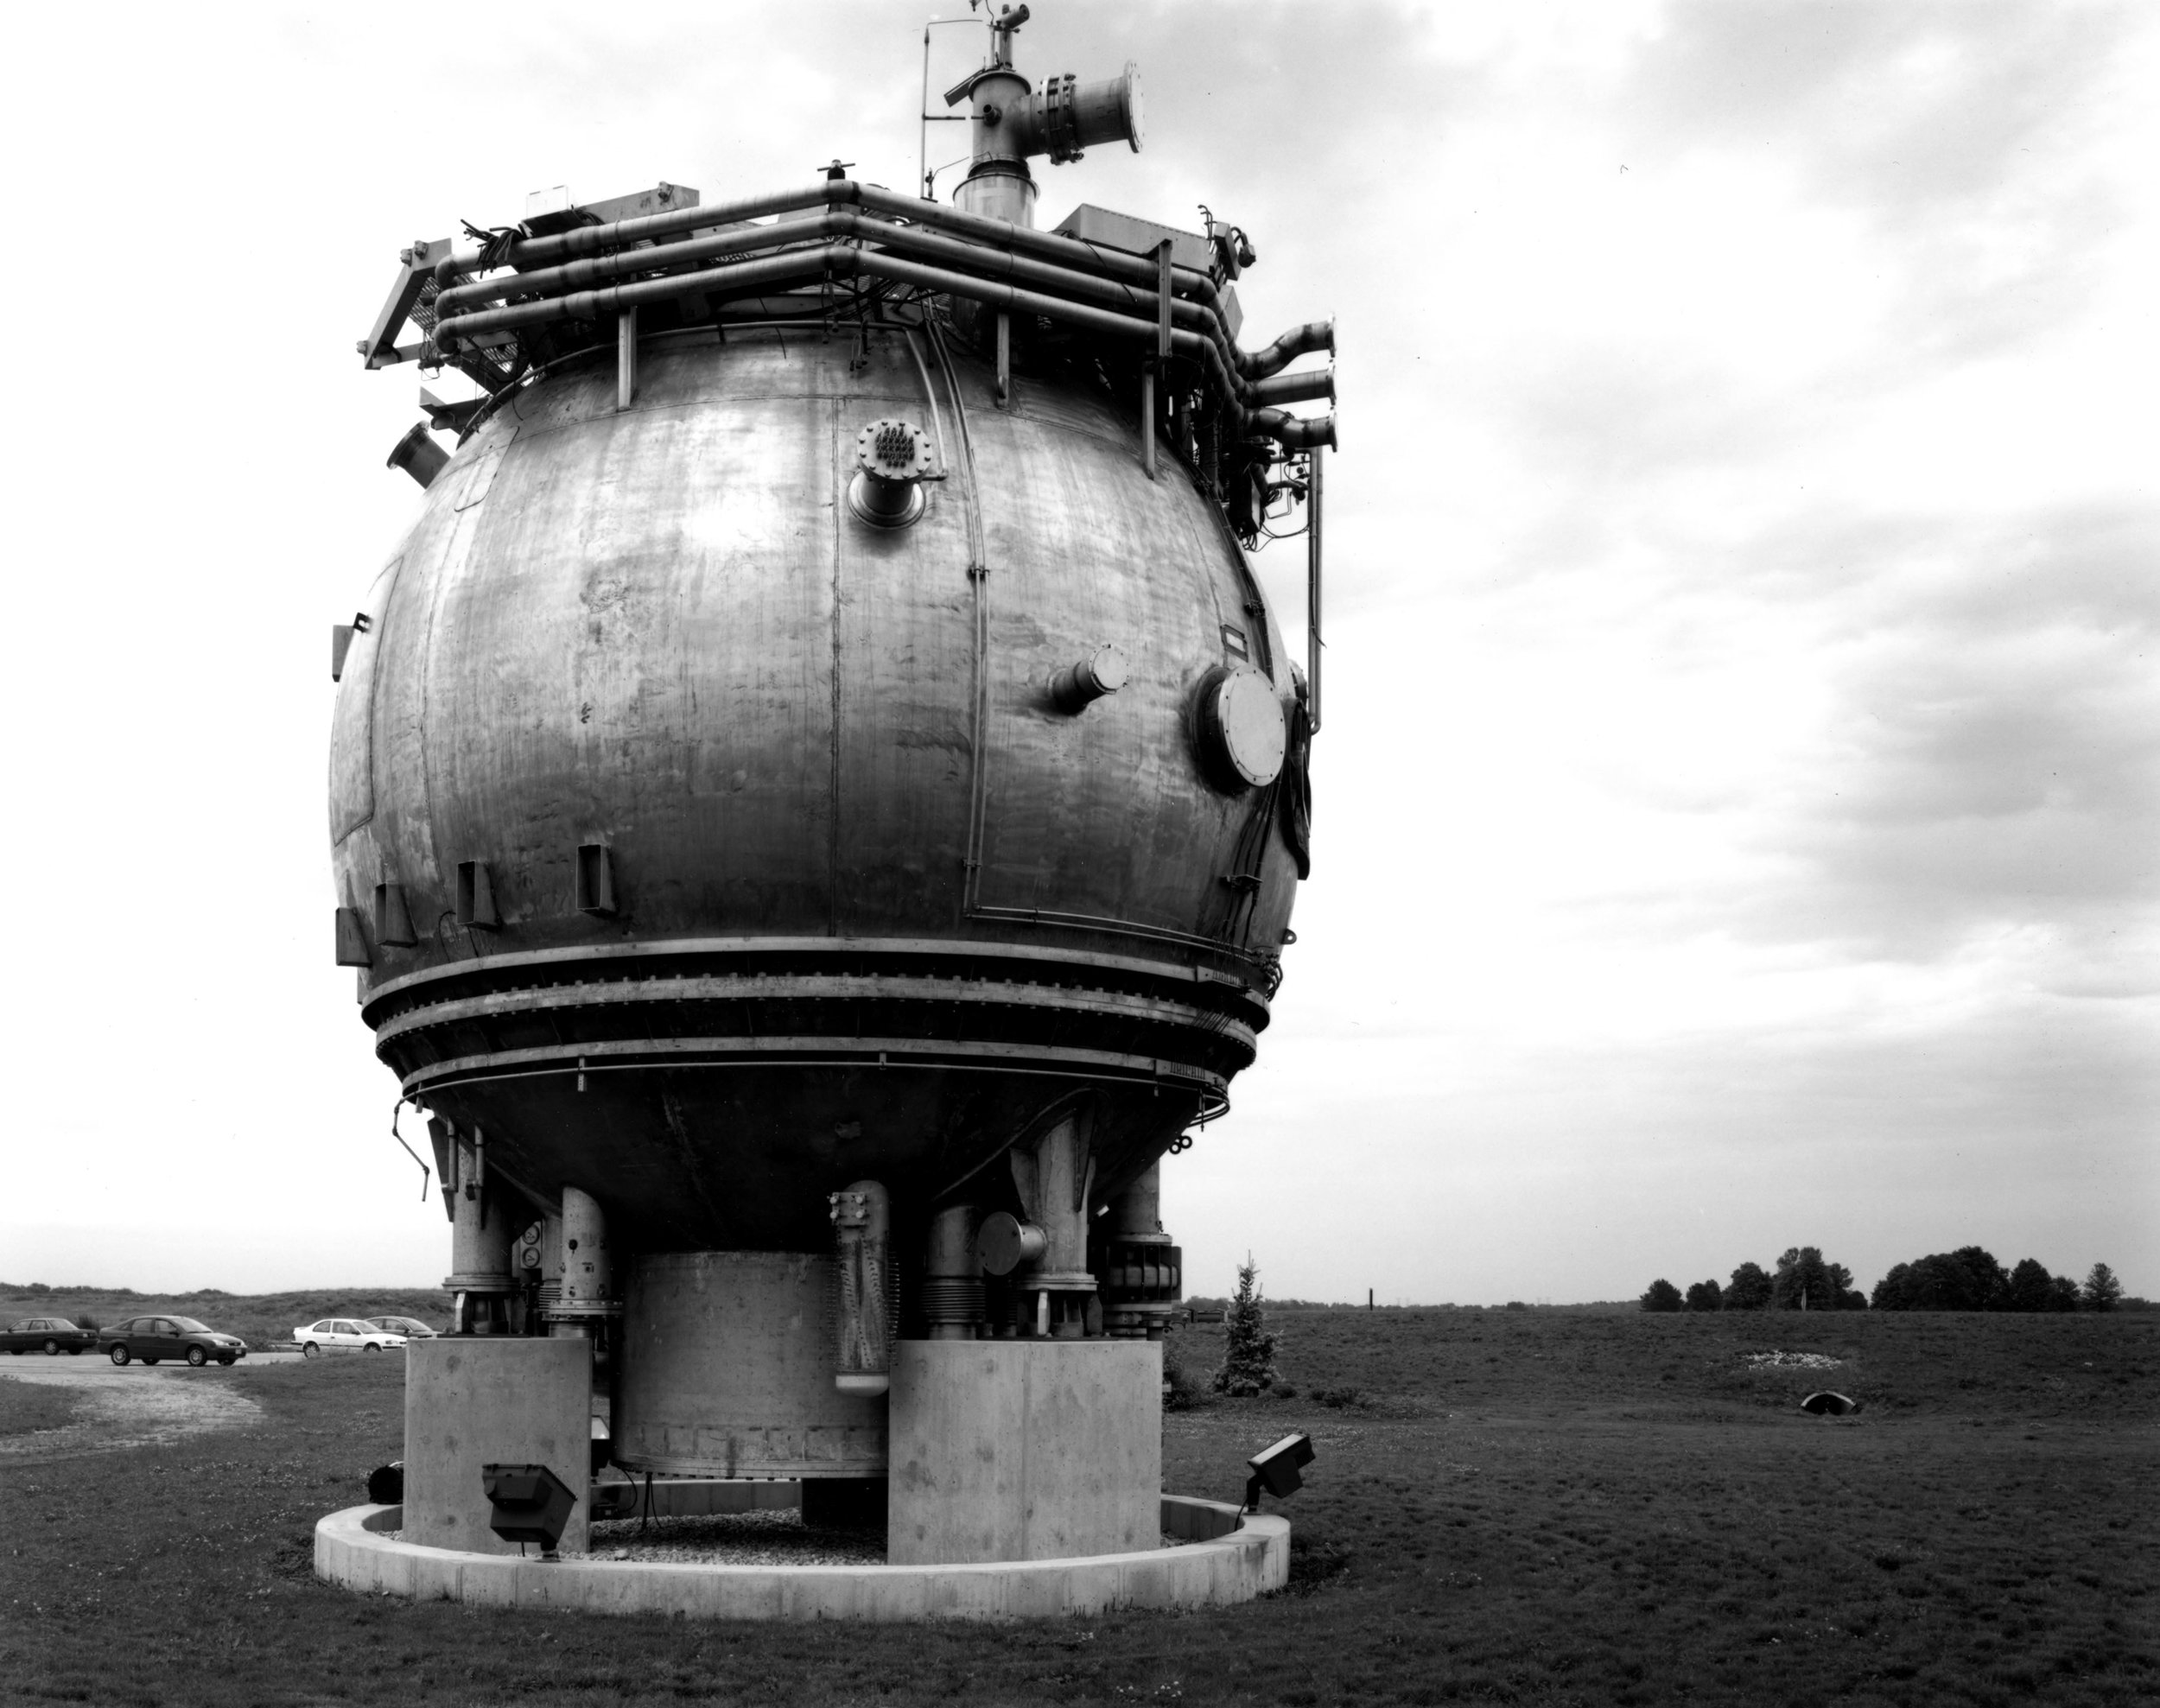 15-foot Bubble Chamber, Fermilab, Illinois, 2006